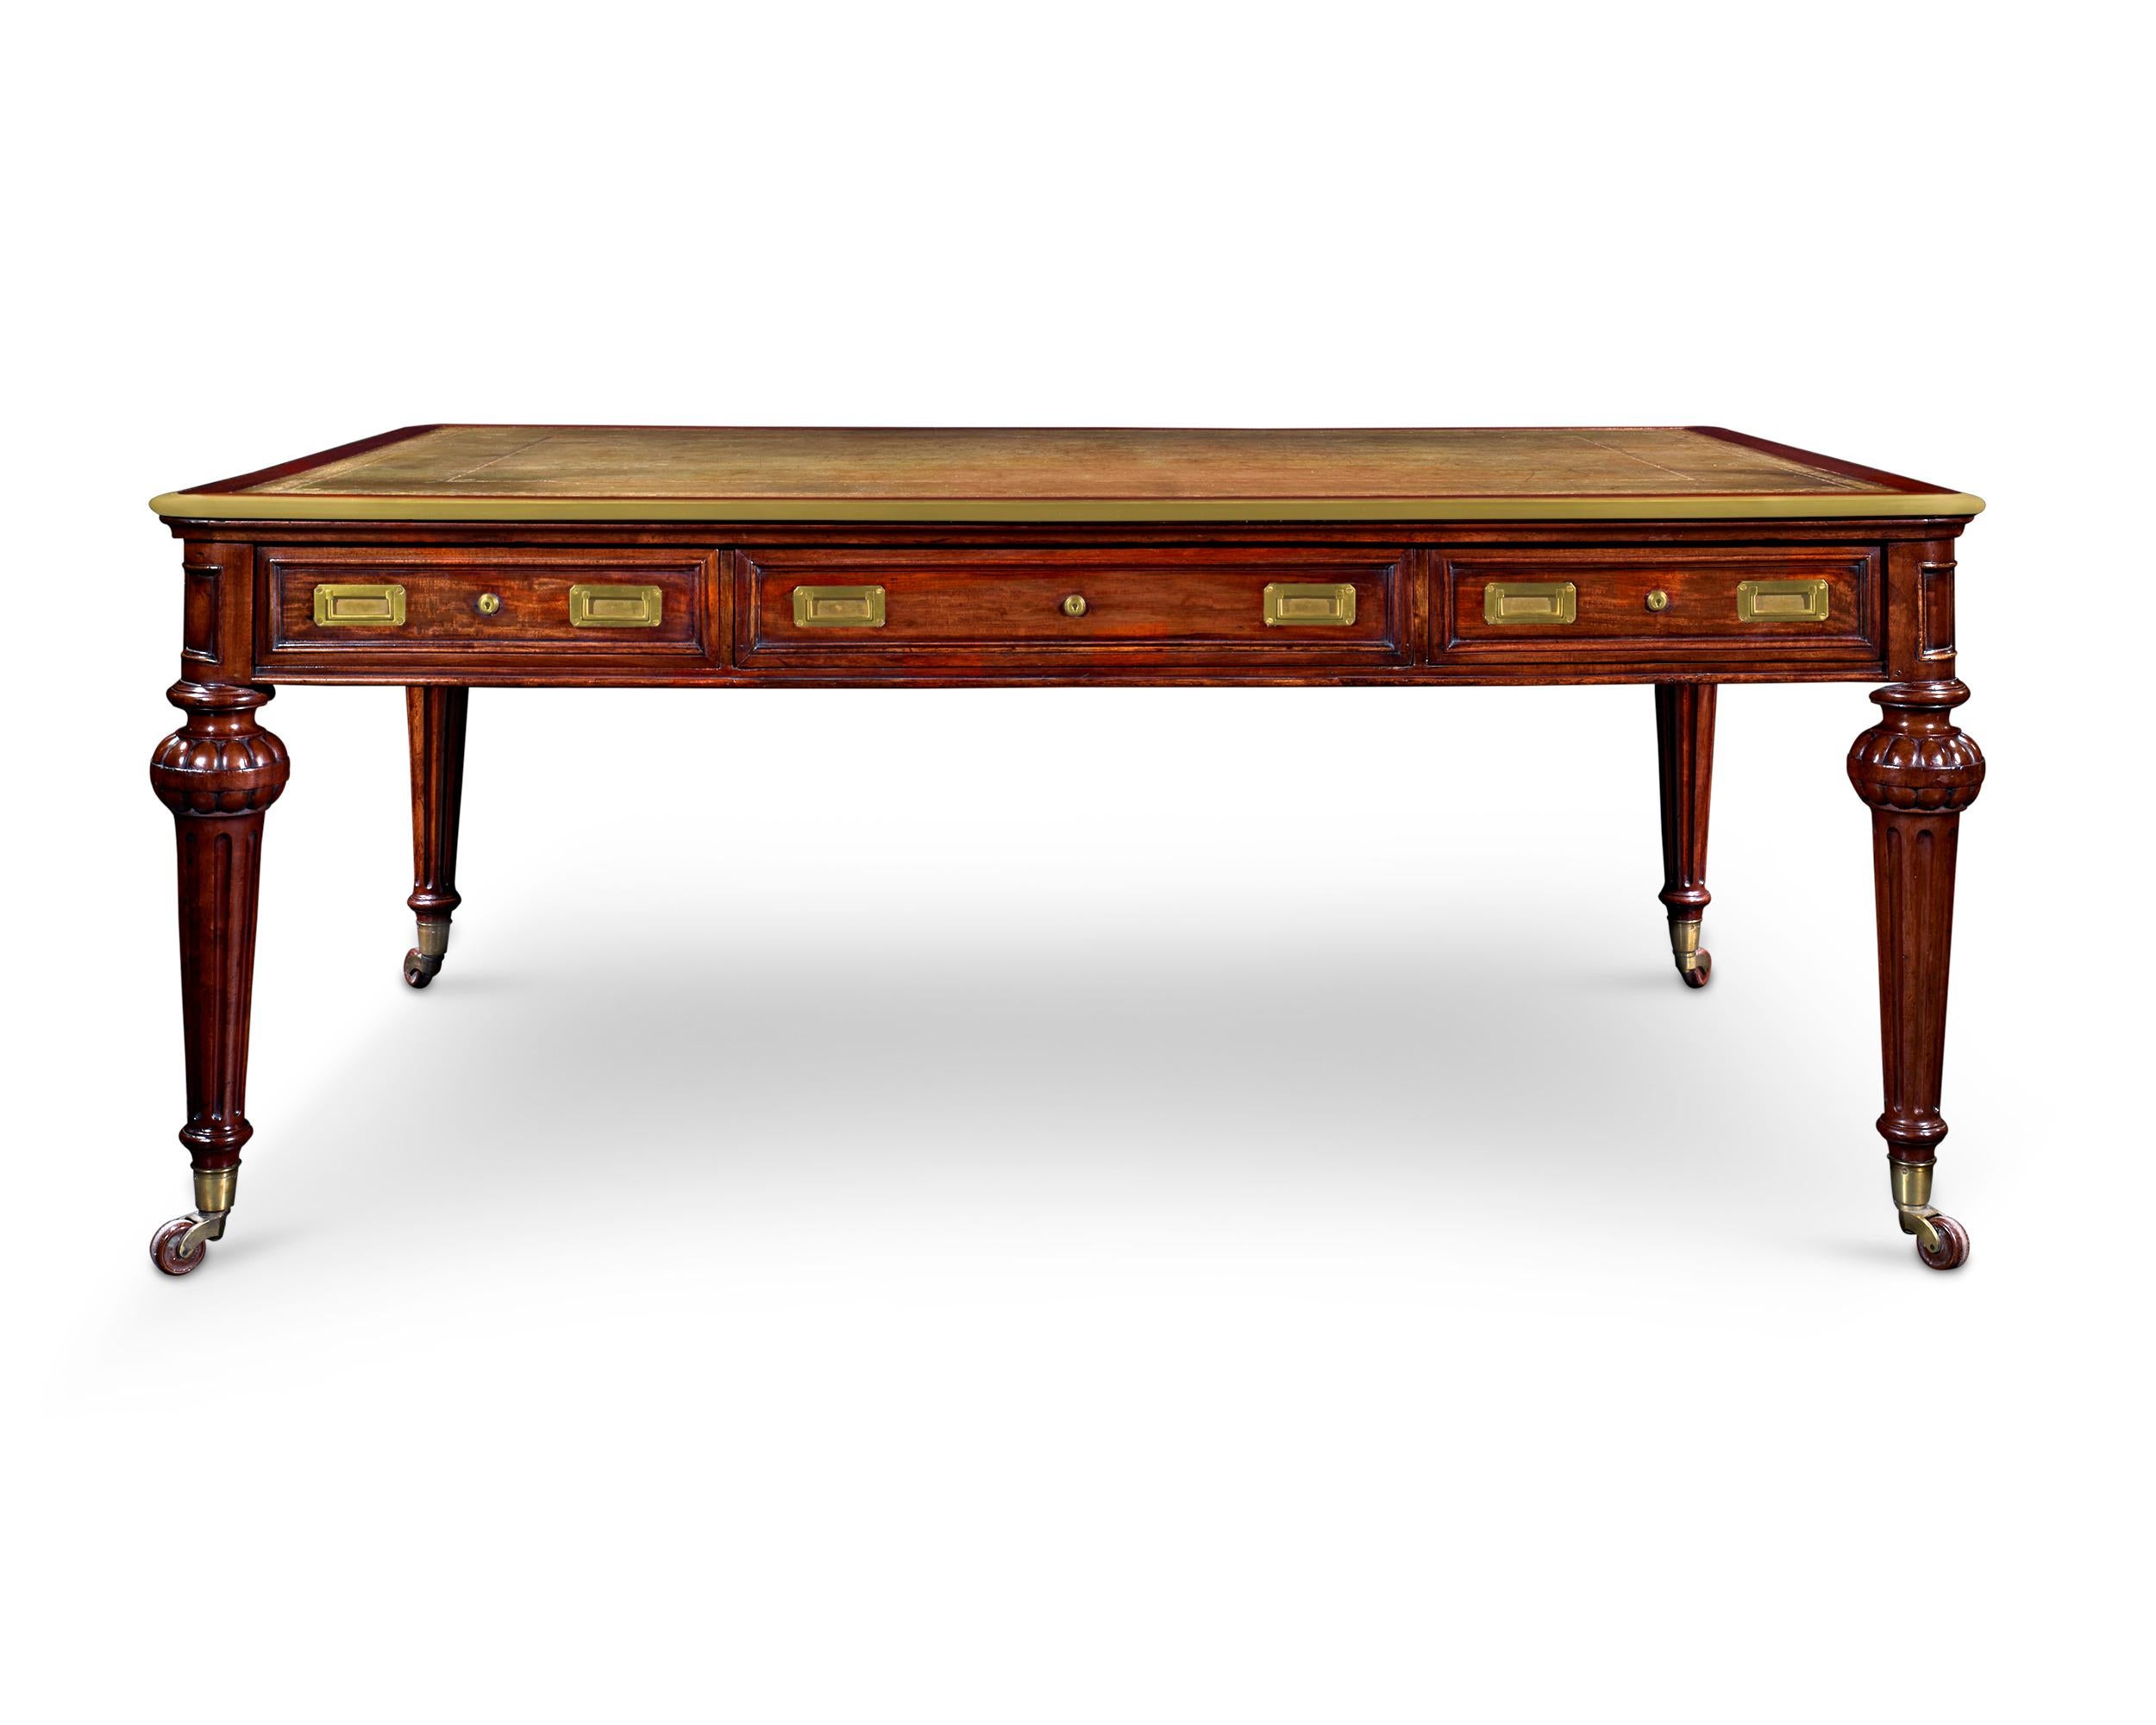 This handsome library table is a remarkable example of the English furnishings that represented wealthy Victorian tastes. The piece is attributed to Holland & Sons, a firm regarded as one of the most important cabinetmakers of the era. Crafted of